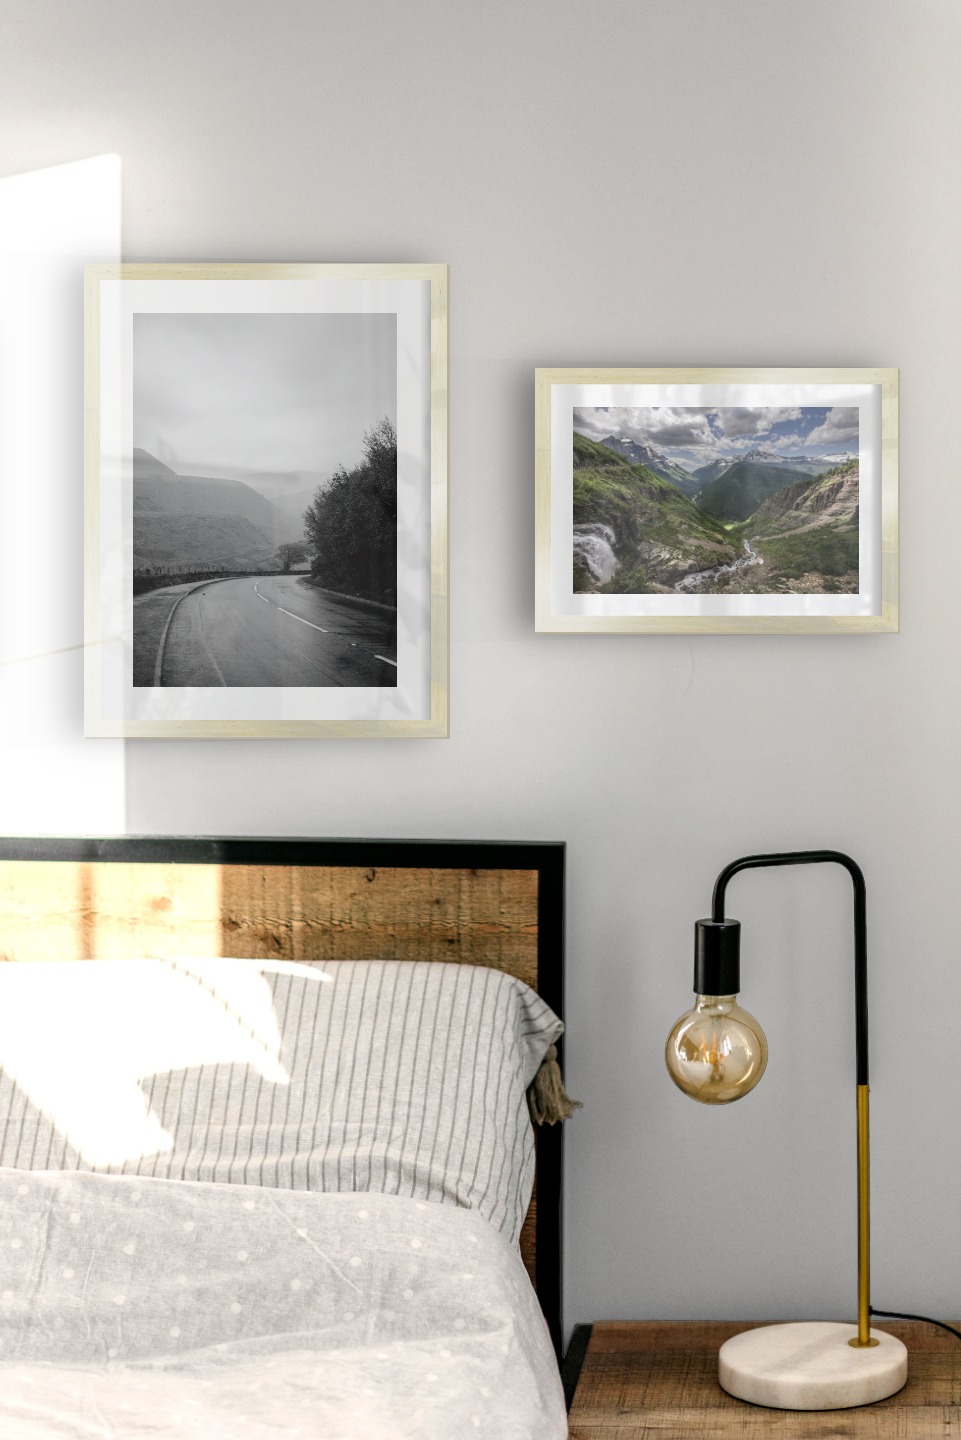 Gallery wall with picture frames in gold in sizes 21x30 and 30x40 with prints "Green valley in front of mountains", "Road that turns" and "Bergsdal"